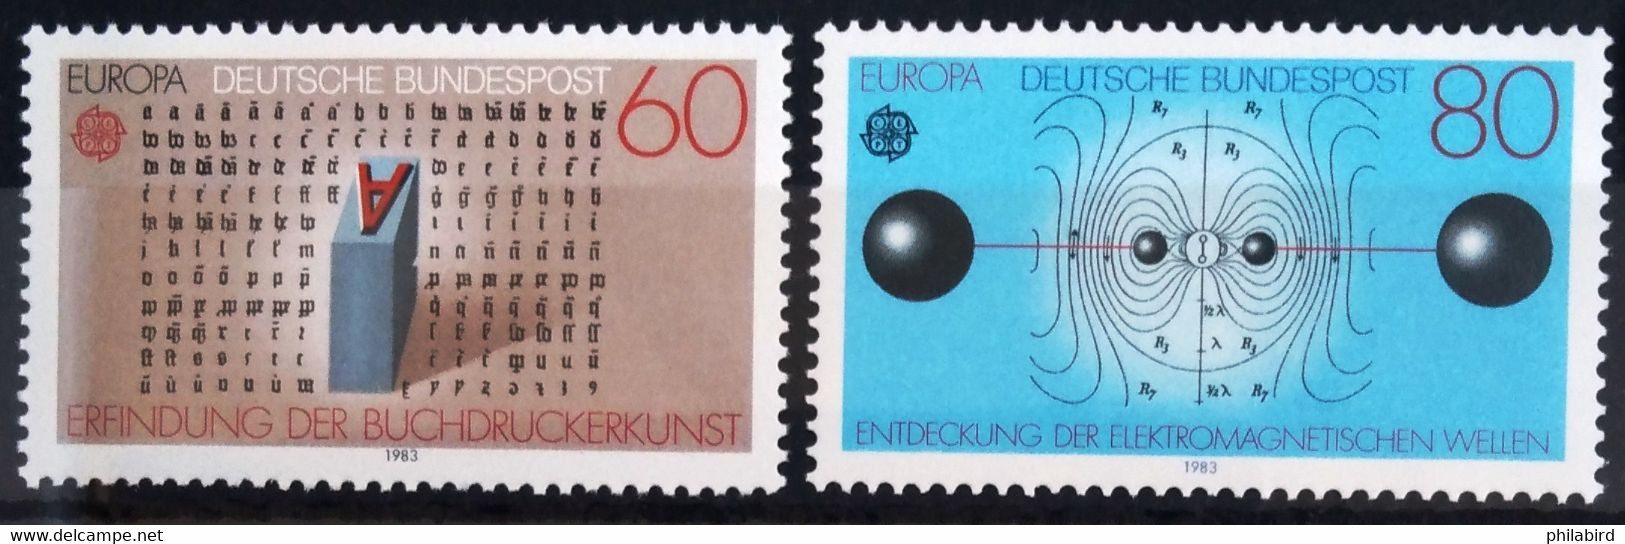 EUROPA 1983 - ALLEMAGNE                 N° 1007/1008                       NEUF* - 1983